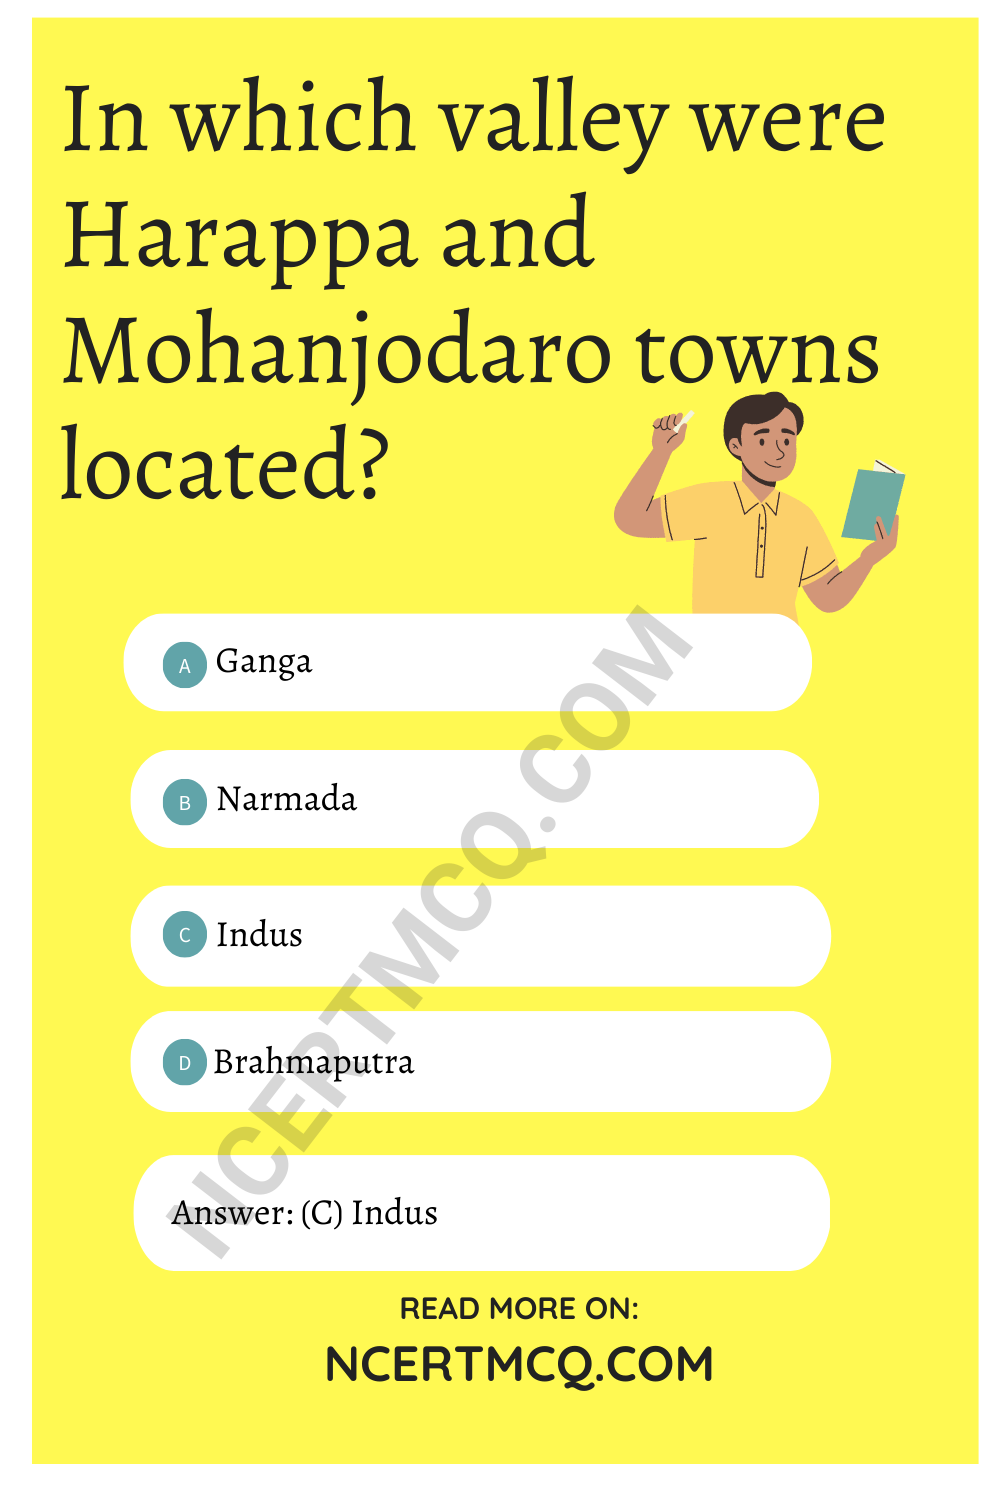 In which valley were Harappa and Mohanjodaro towns located?